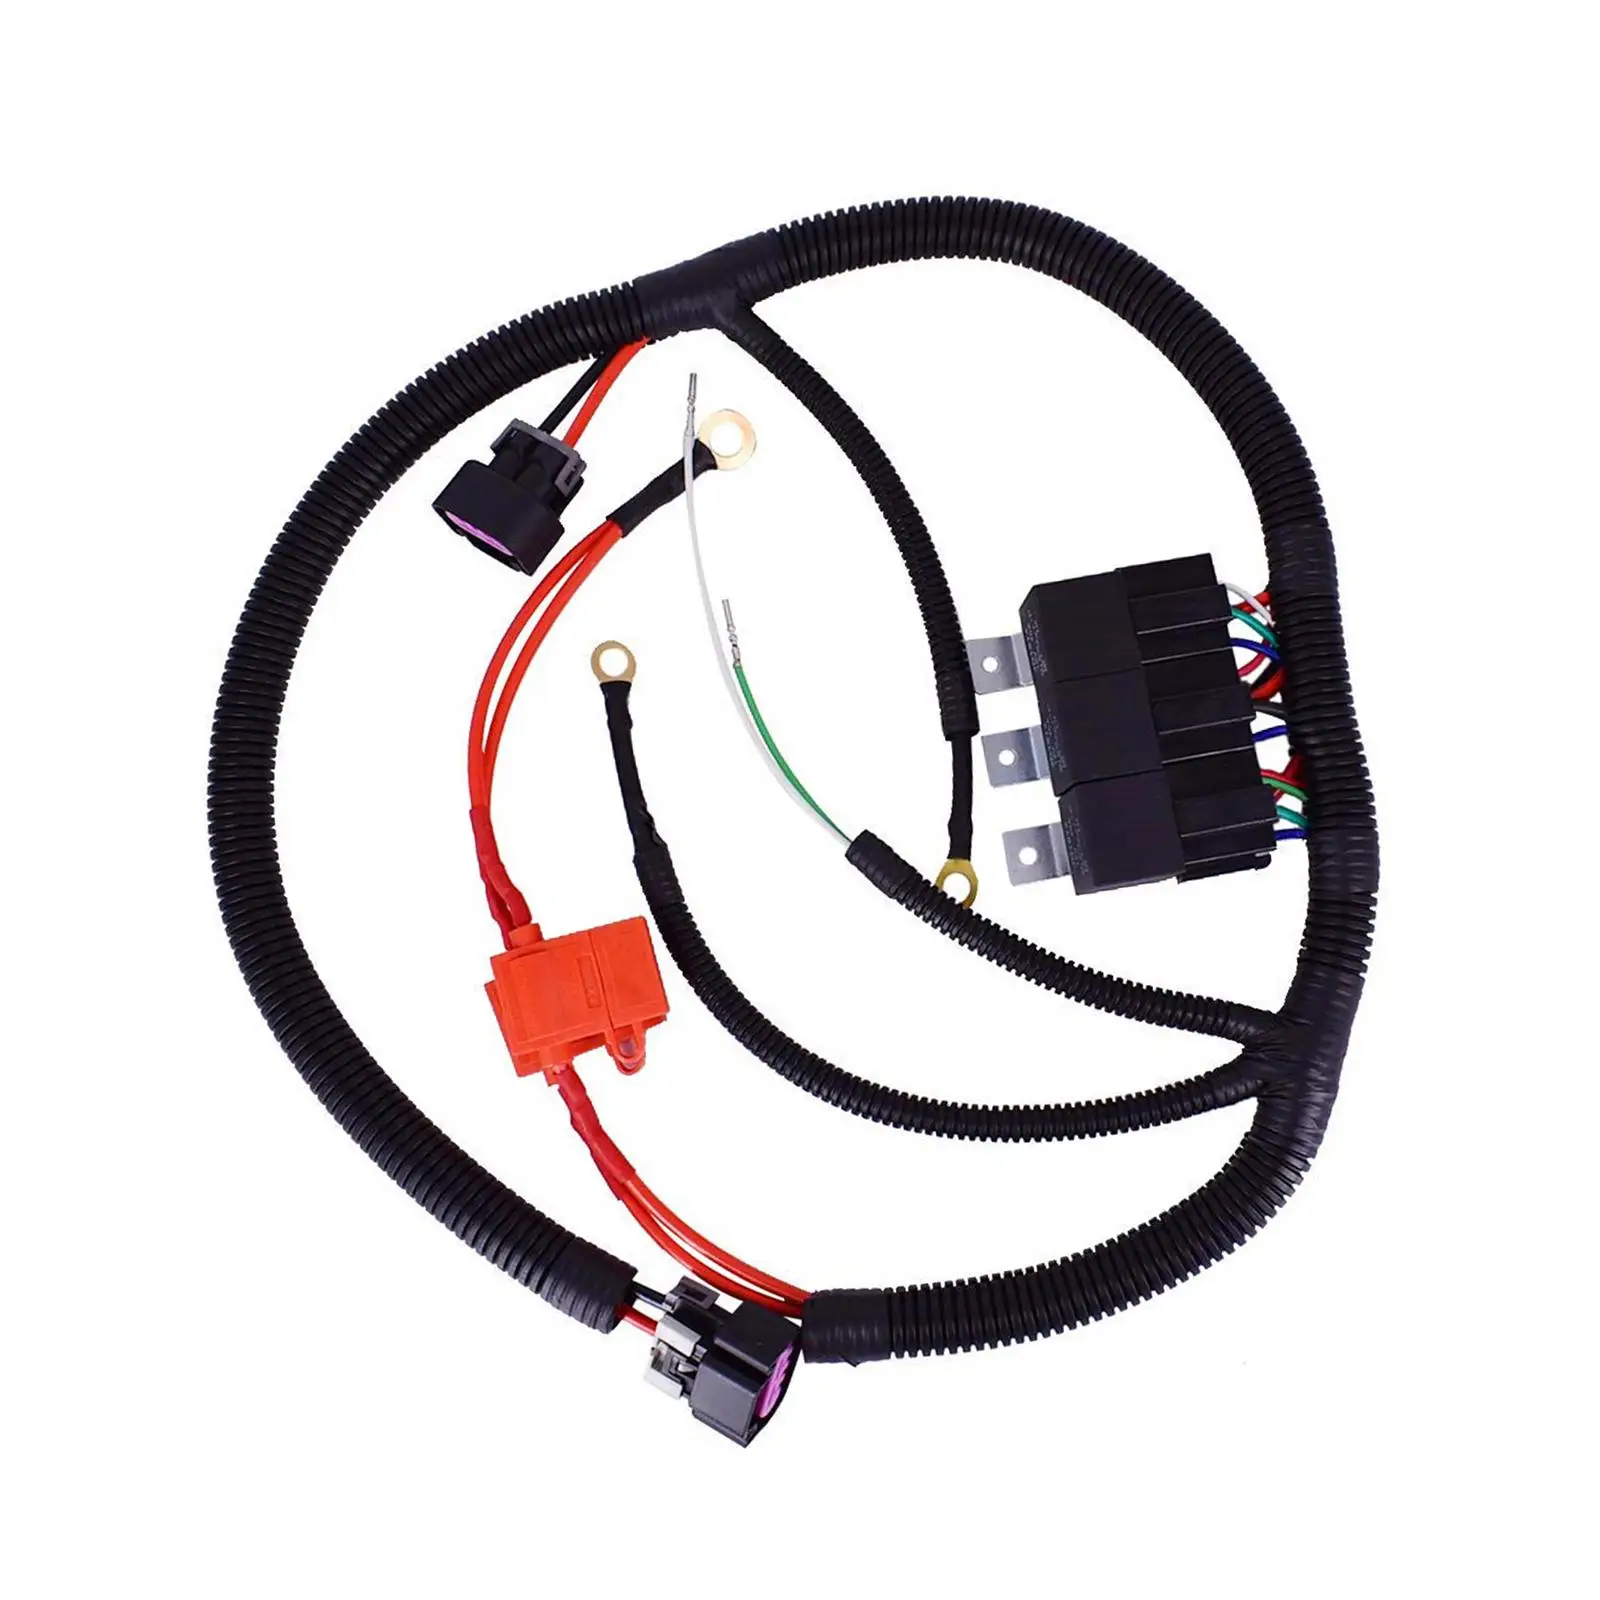 Dual Electric Fan Upgrade Wiring Harness, 7L5533A226T Accessories for Escalade Control Wiring Harness Tool